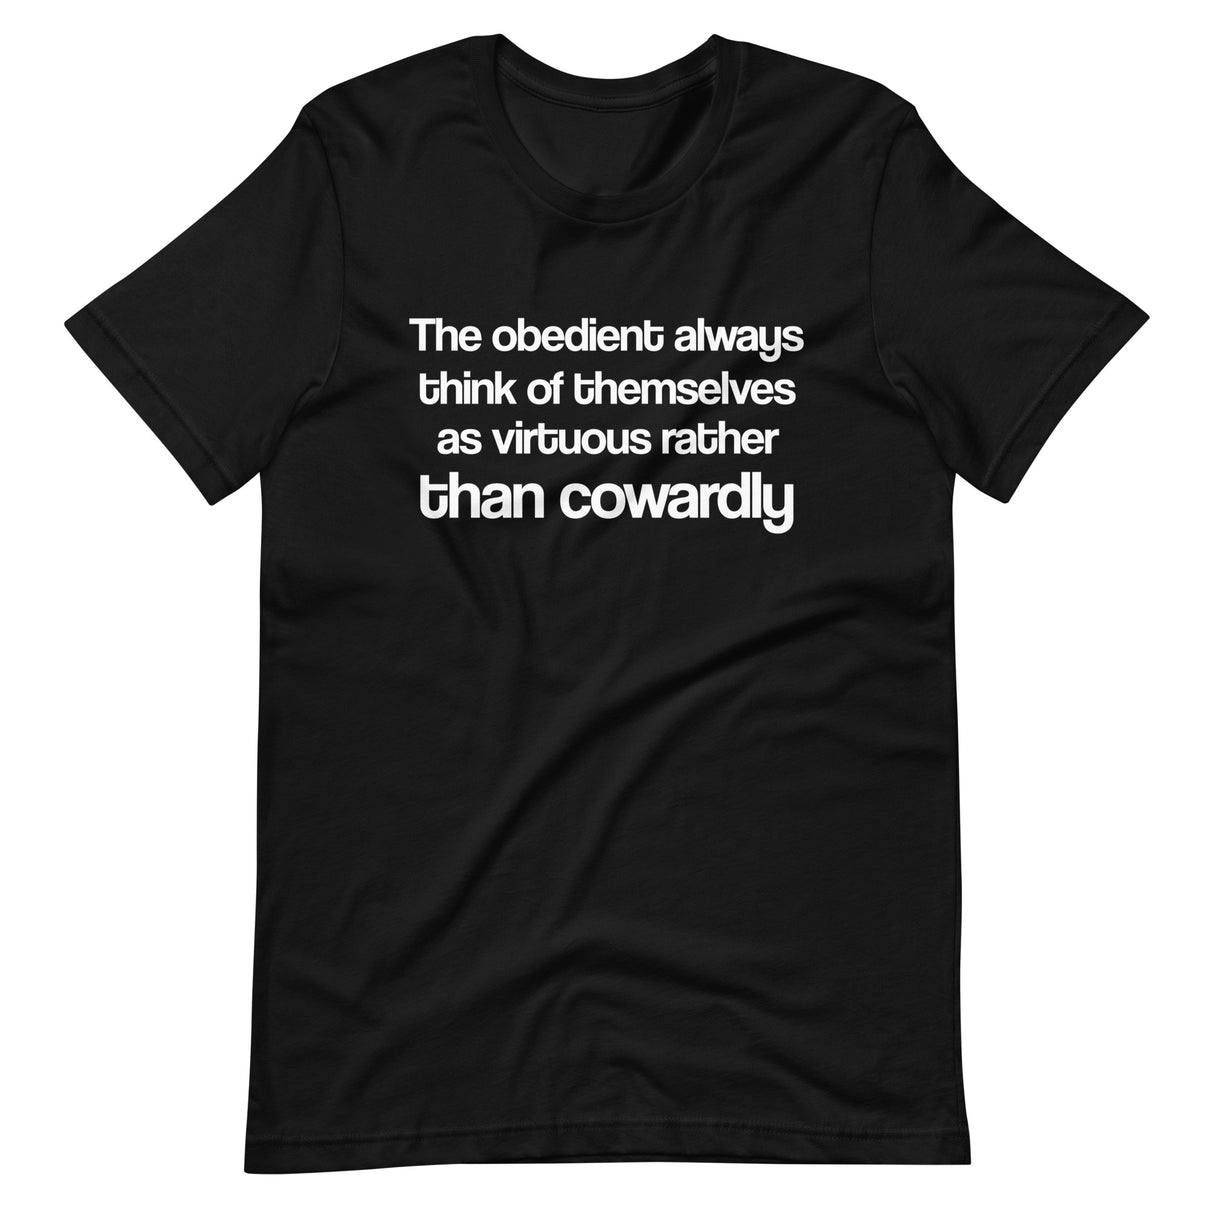 The Obedient are Cowardly Shirt by Libertarian Country